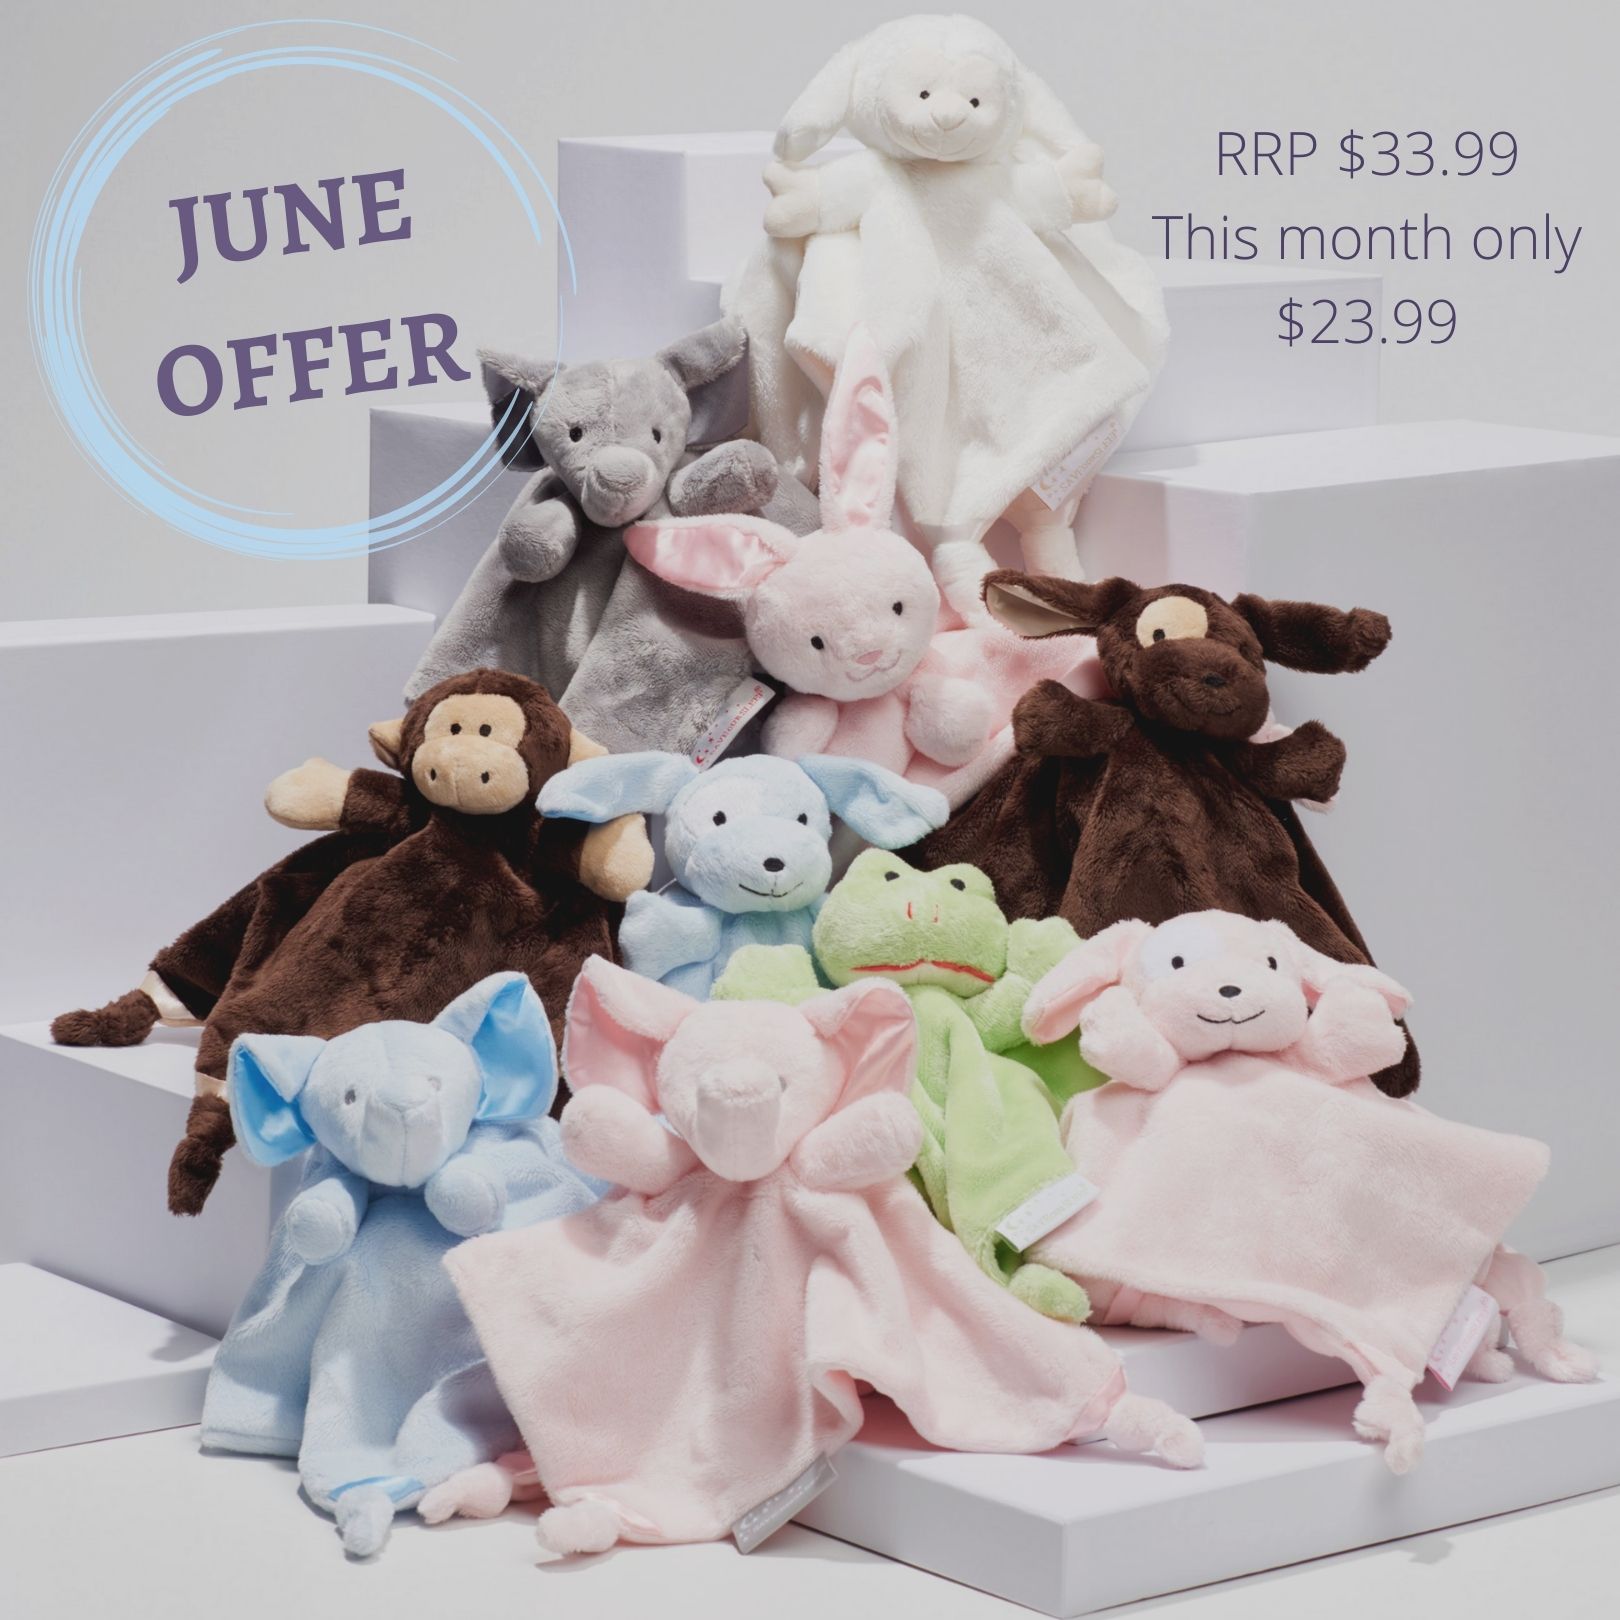 June Offer -  All Comforters just $23.99 each